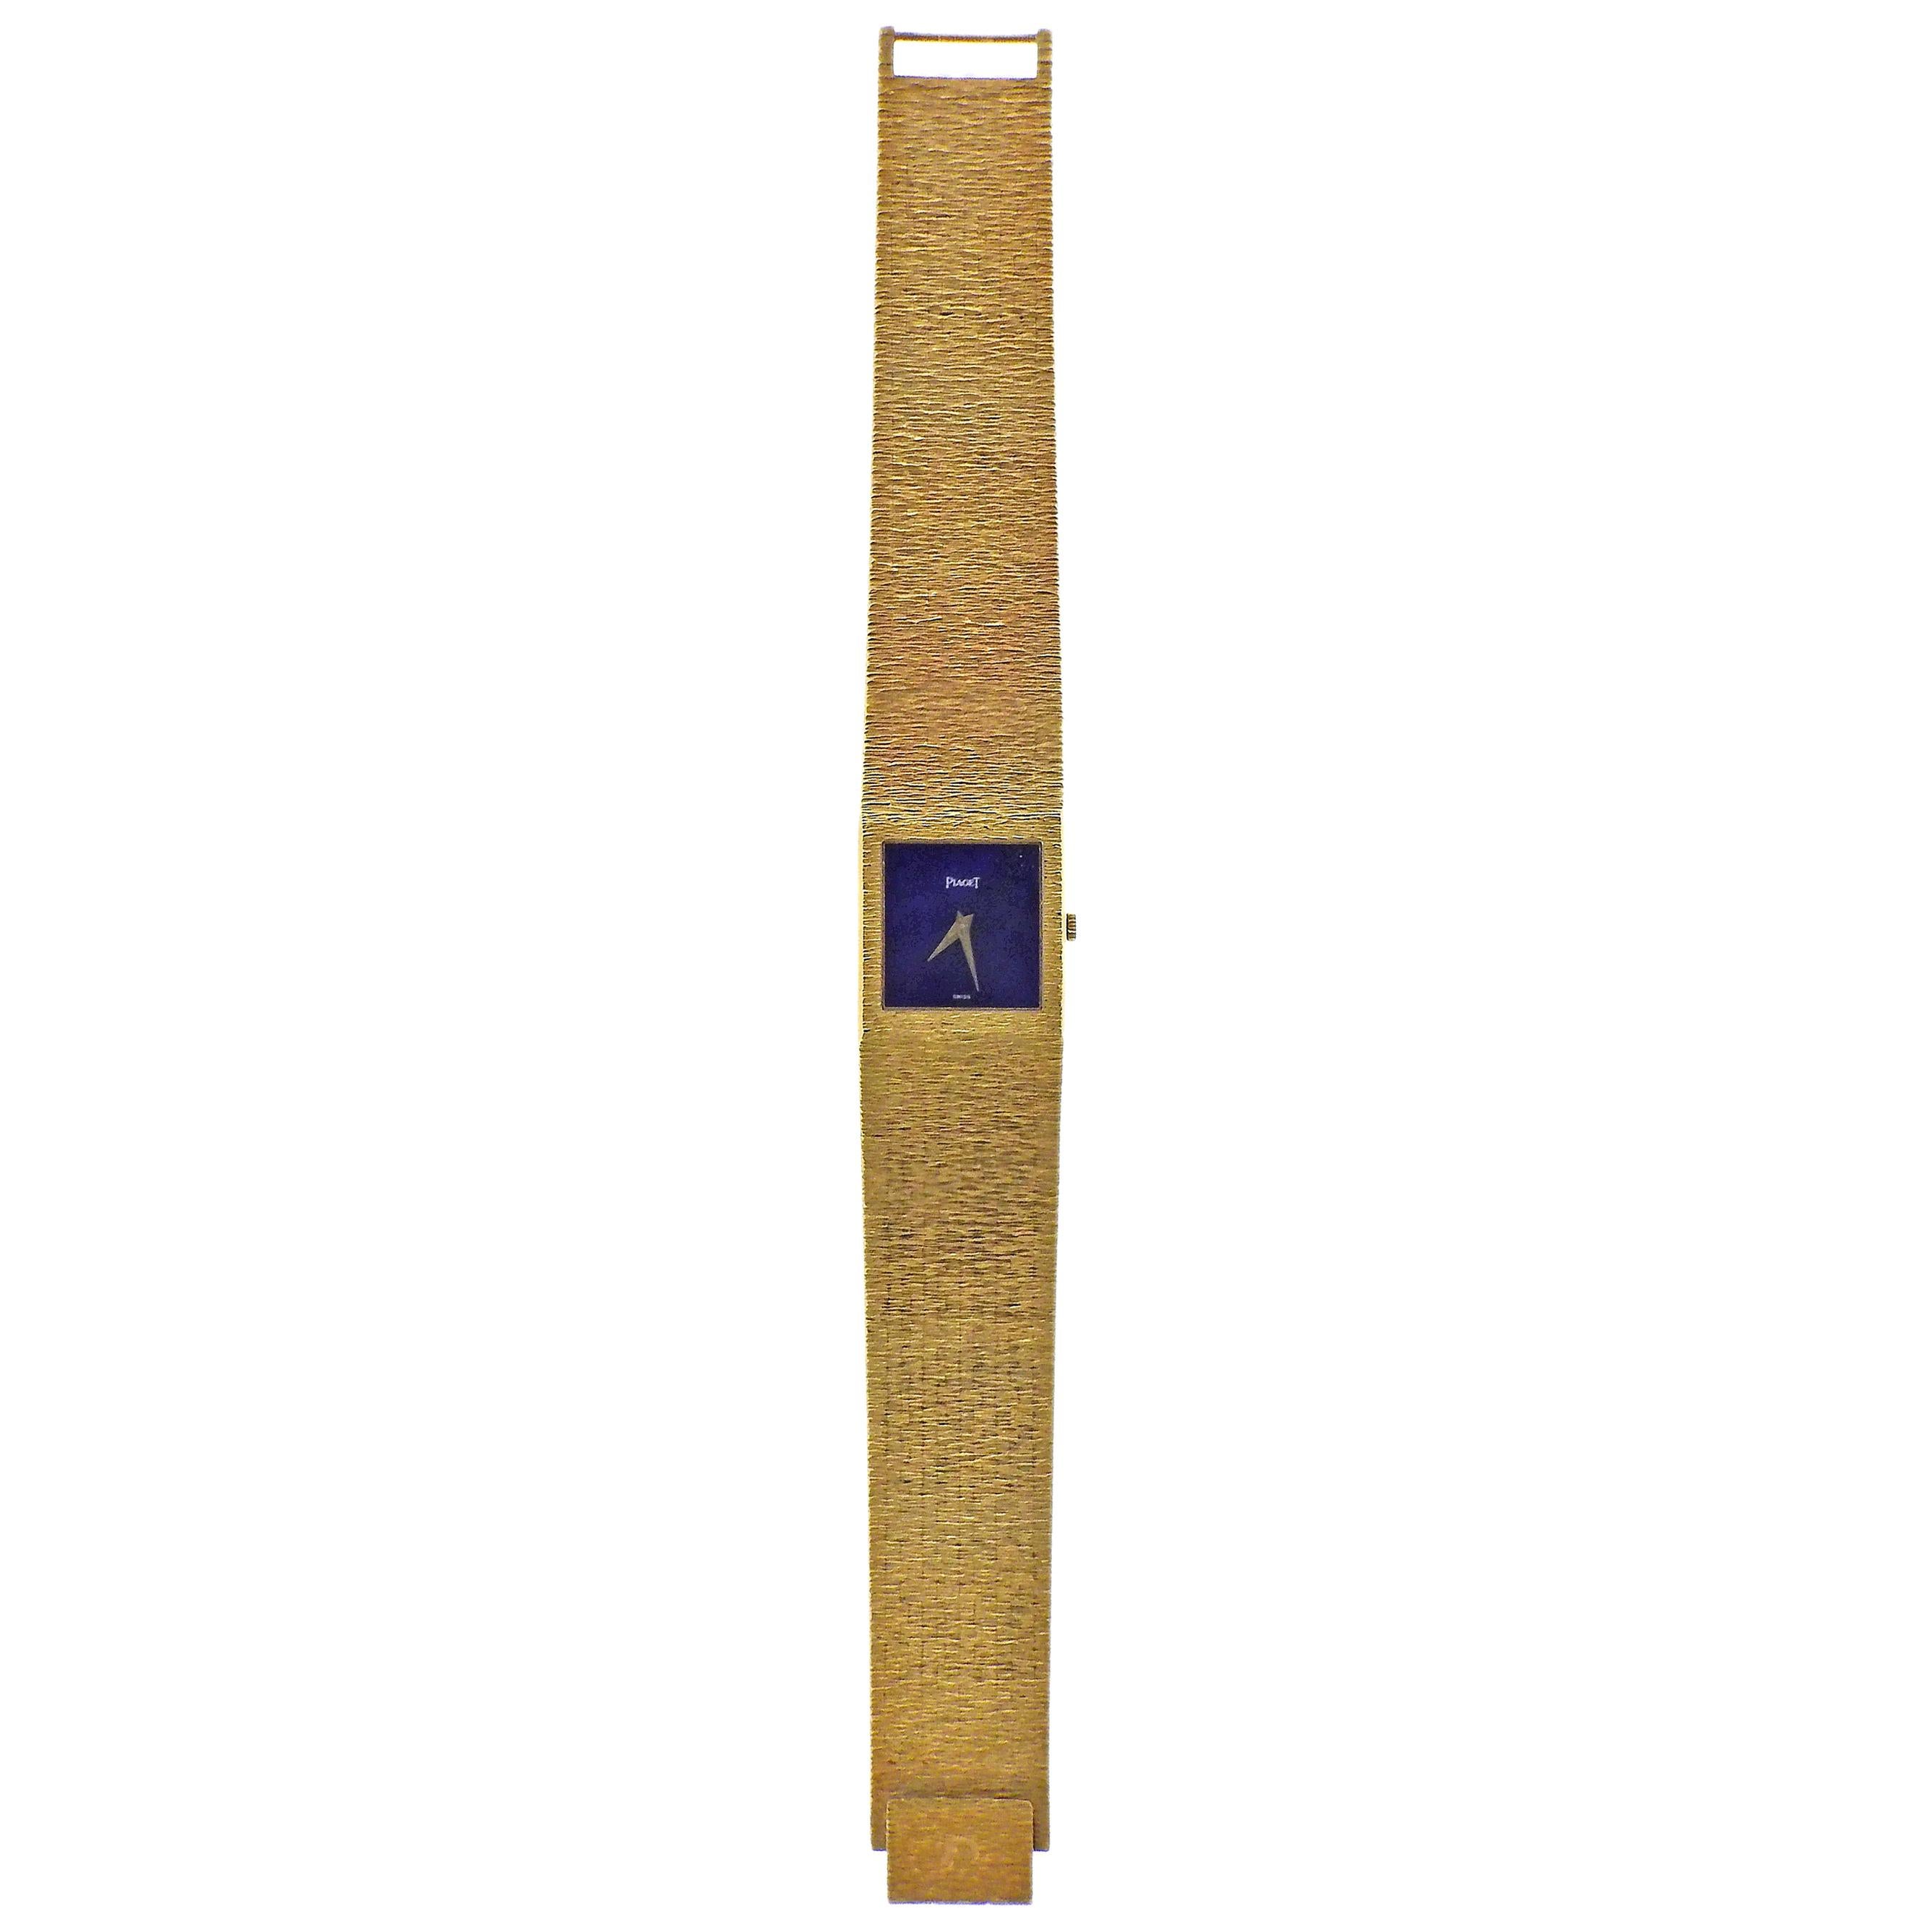 Piaget Classic Yellow Gold Lapis Dial Watch